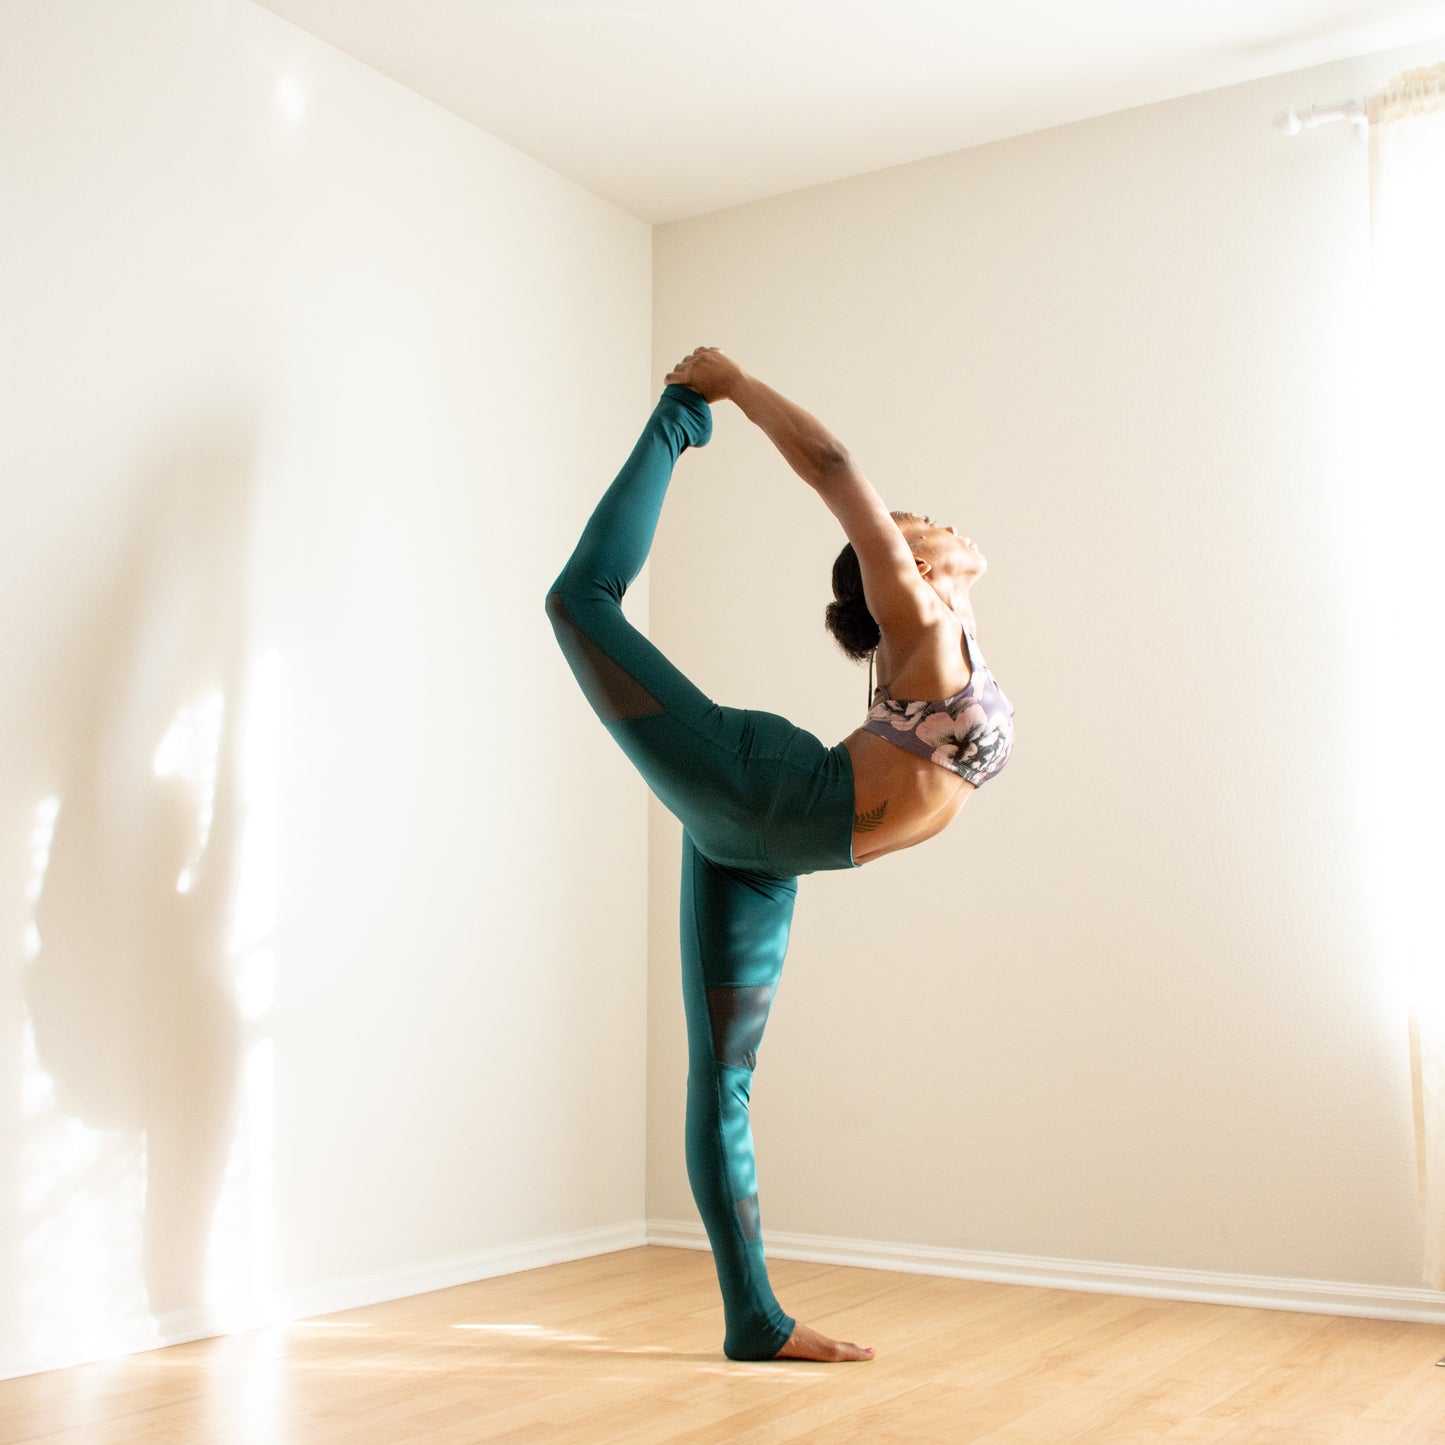 A flexible yoga practitioner performs dancer's pose in the corner of a neutral, empty room.